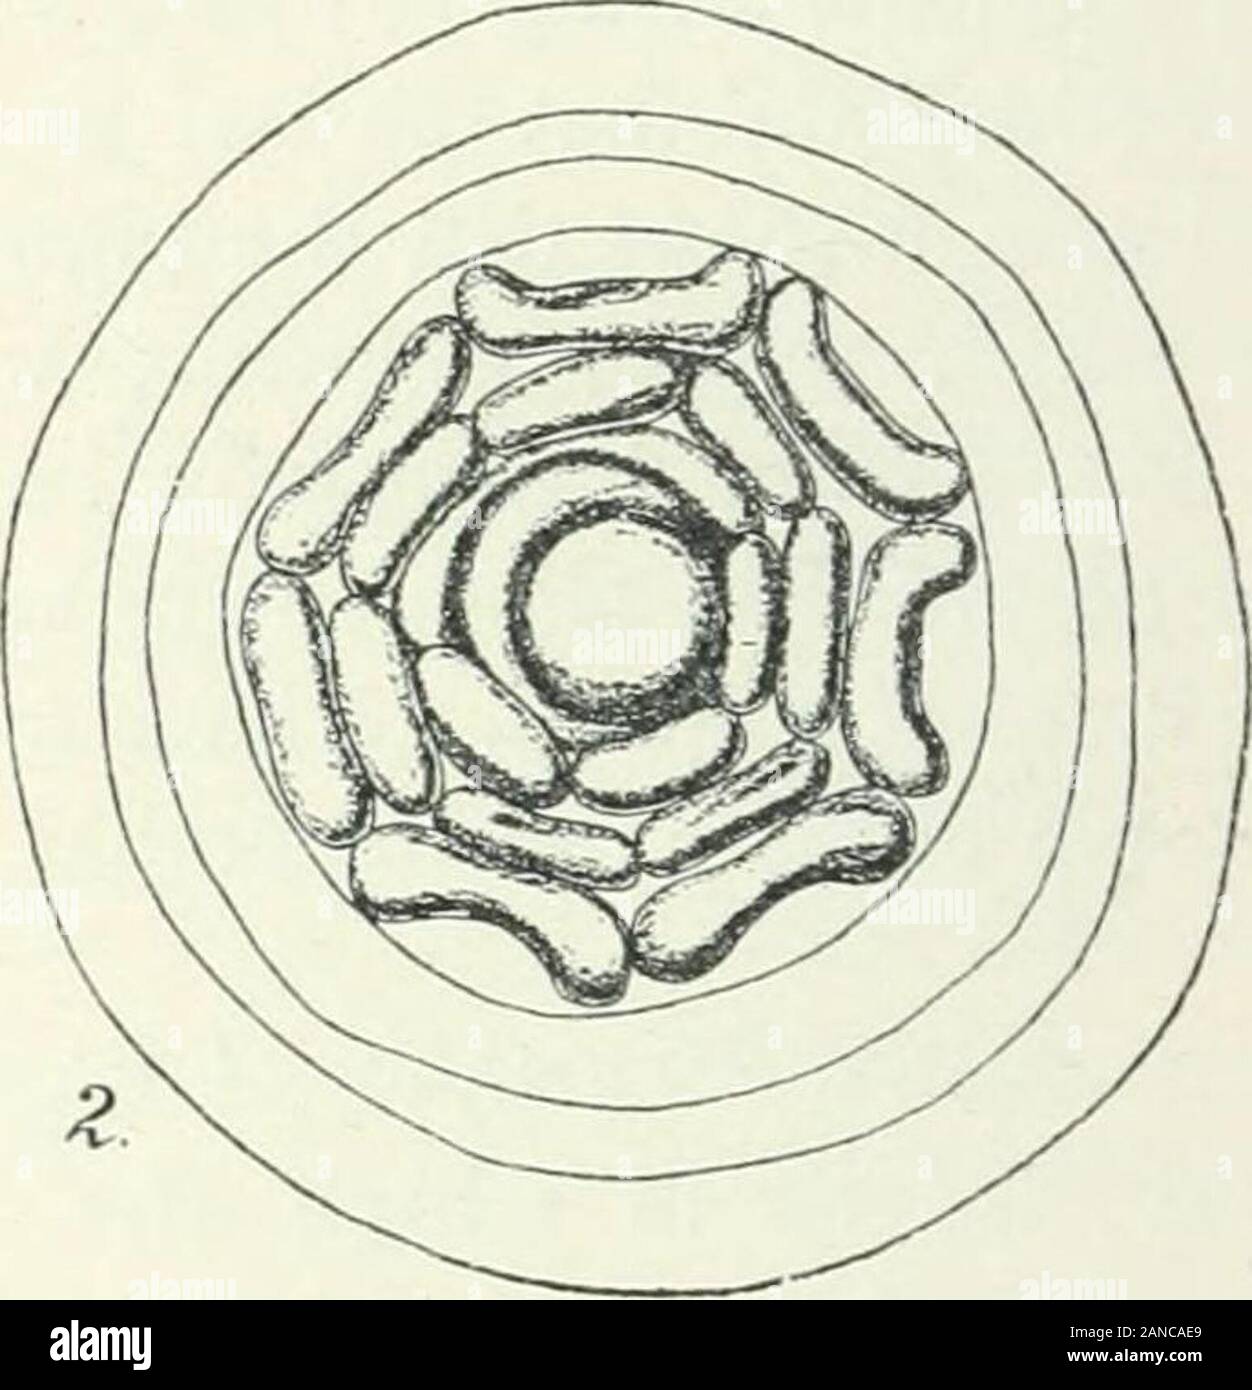 Organography of plants, especially of the archegoniatae and spermaphyta . Fig. 213. 1, Limnophila lieterophylla. Apex of shoot seen from above. 2, Alhemilla nivalis. Apex of shootseen from above ; a young primordium of a leaf seen to the left upper side of apex, the older leaves are deeplydivided into leaflets, in the outer two the ring-like sheath-portion is formed. Magnified. lateral primordia grow less strongly. If now the laminar portion betweenthe lateral primordia grows strongly in length and less in breadth ^, and thebase of each lateral primordium grows similarly, a pinnate leaf will r Stock Photo